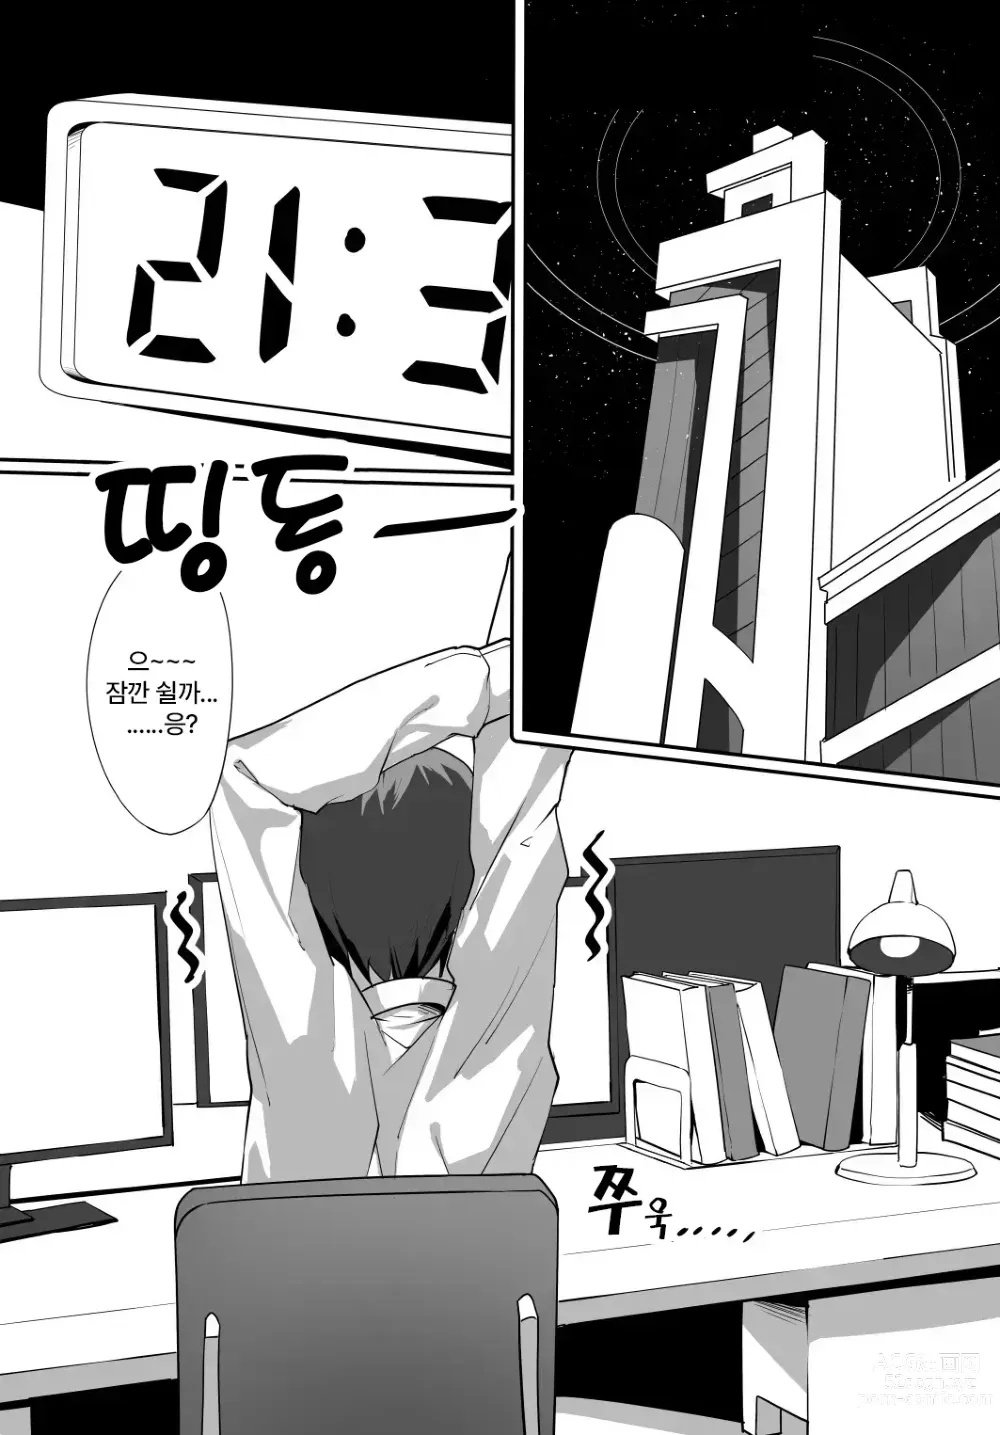 Page 2 of doujinshi 알려줘